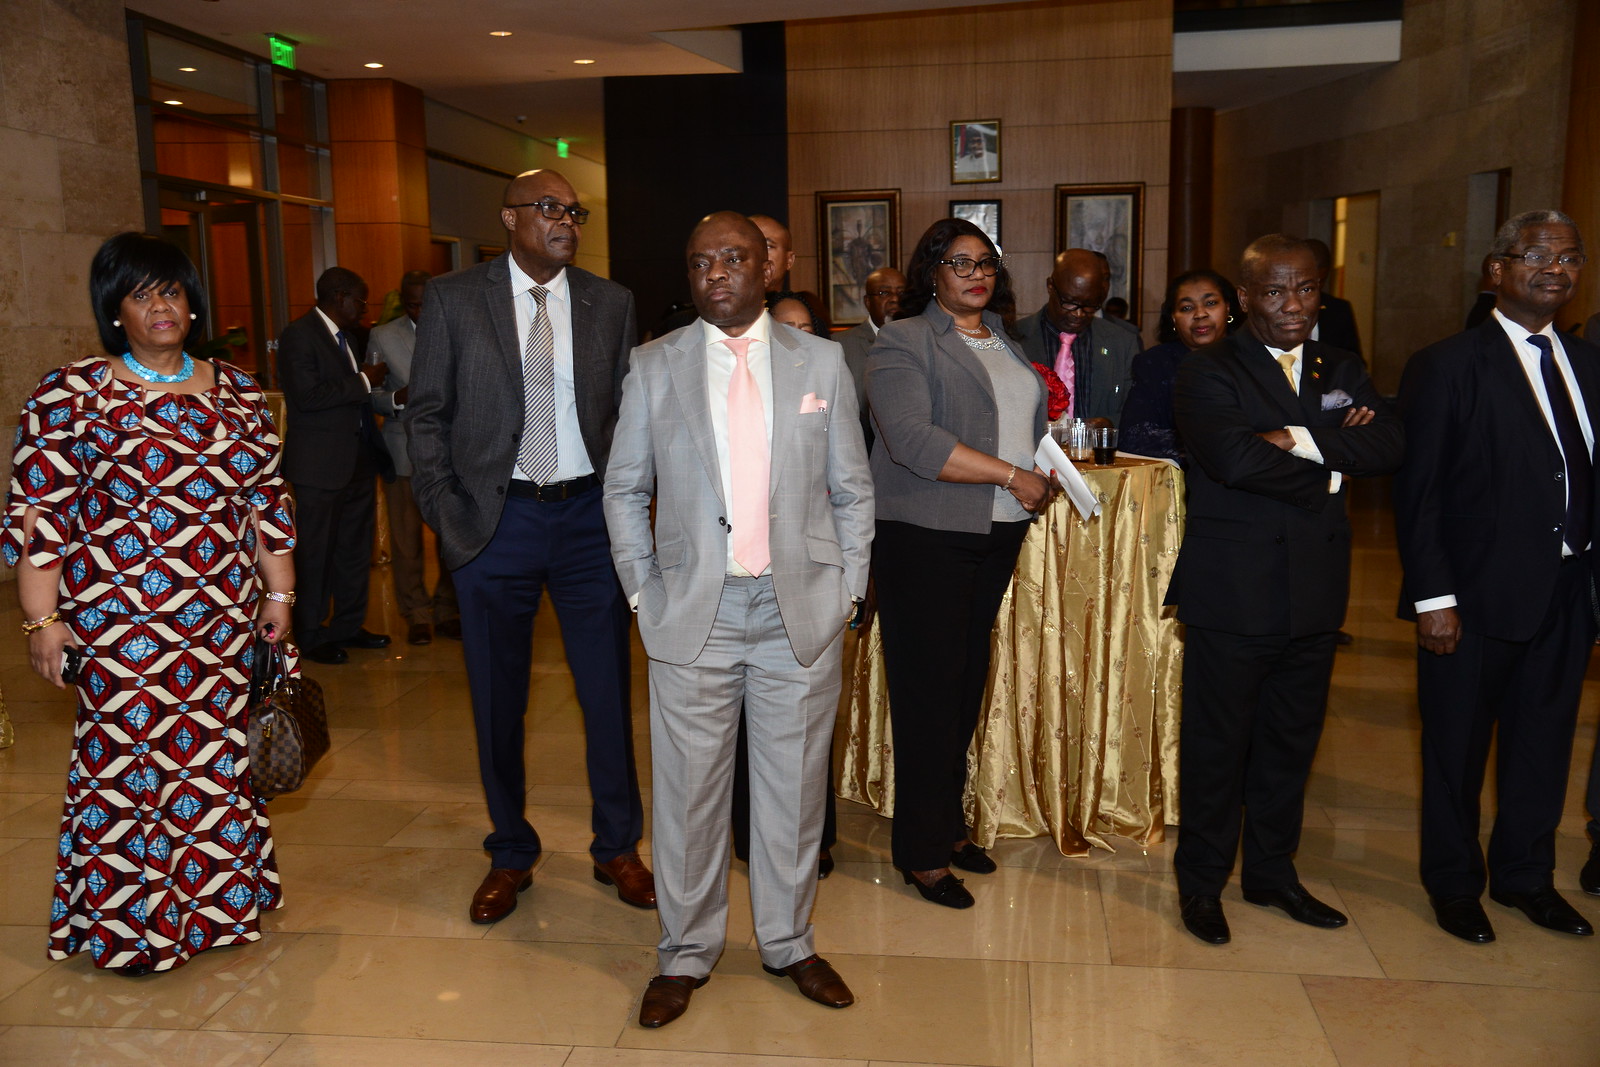 Farewell reception in honour of H.E Jeremiah C.Sulunteh , outgoing Ambassador of Liberia to USA at the Embassy of Nigeria